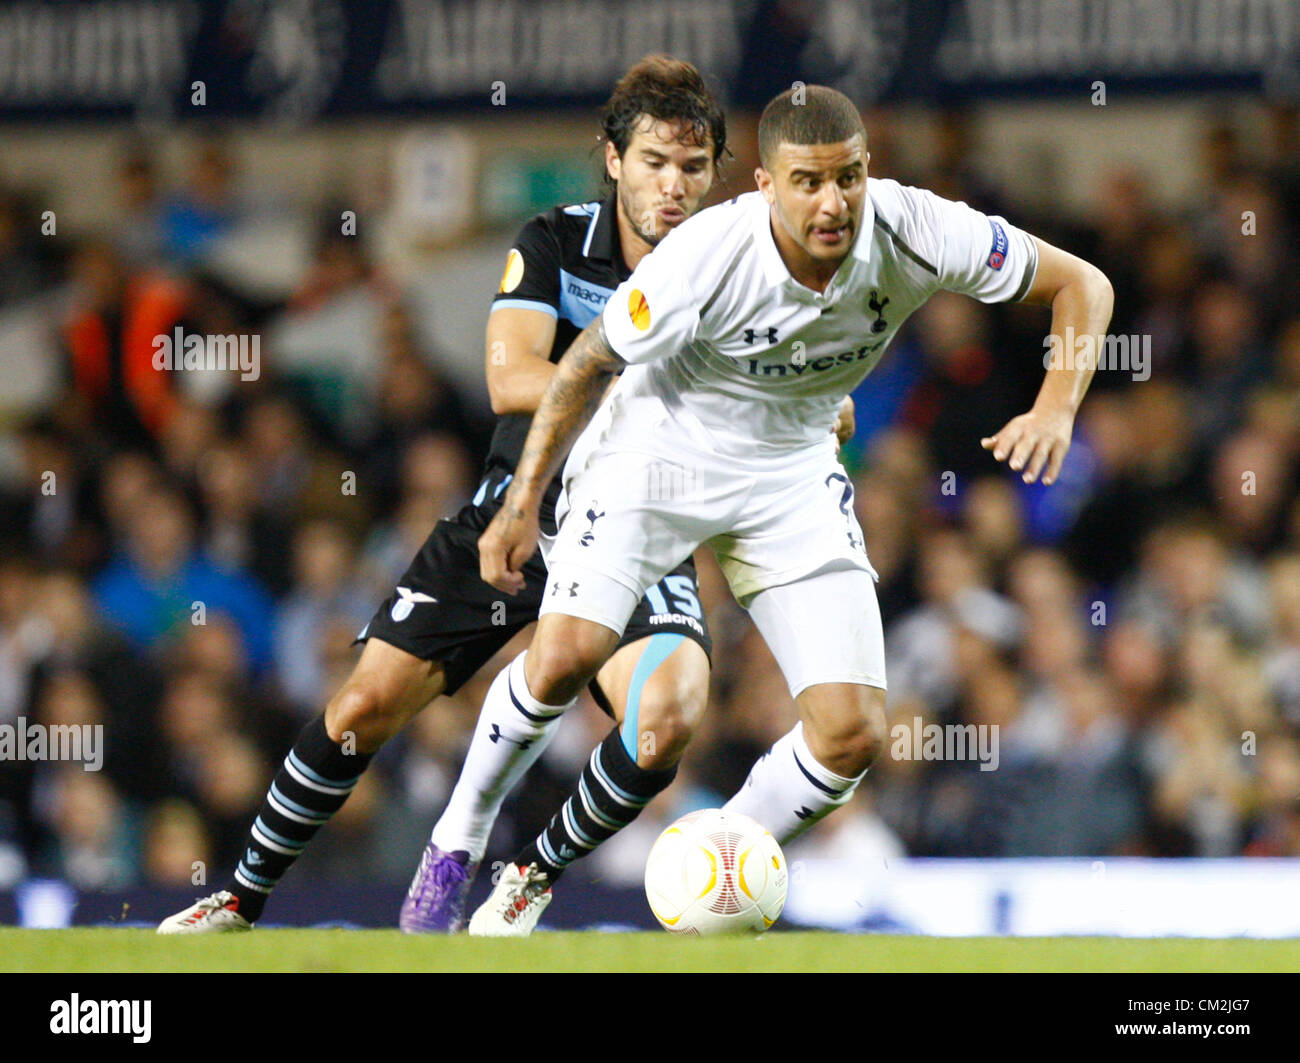 20.09.2012 London, ENGLAND:  Kyle Walker of Tottenham Hotspur holds of Alvaro Gonzalez of S.S. Lazio in action during the Europa League Group J match between Tottenham Hotspur and SS Lazio at White Hart Lane Stadium Stock Photo